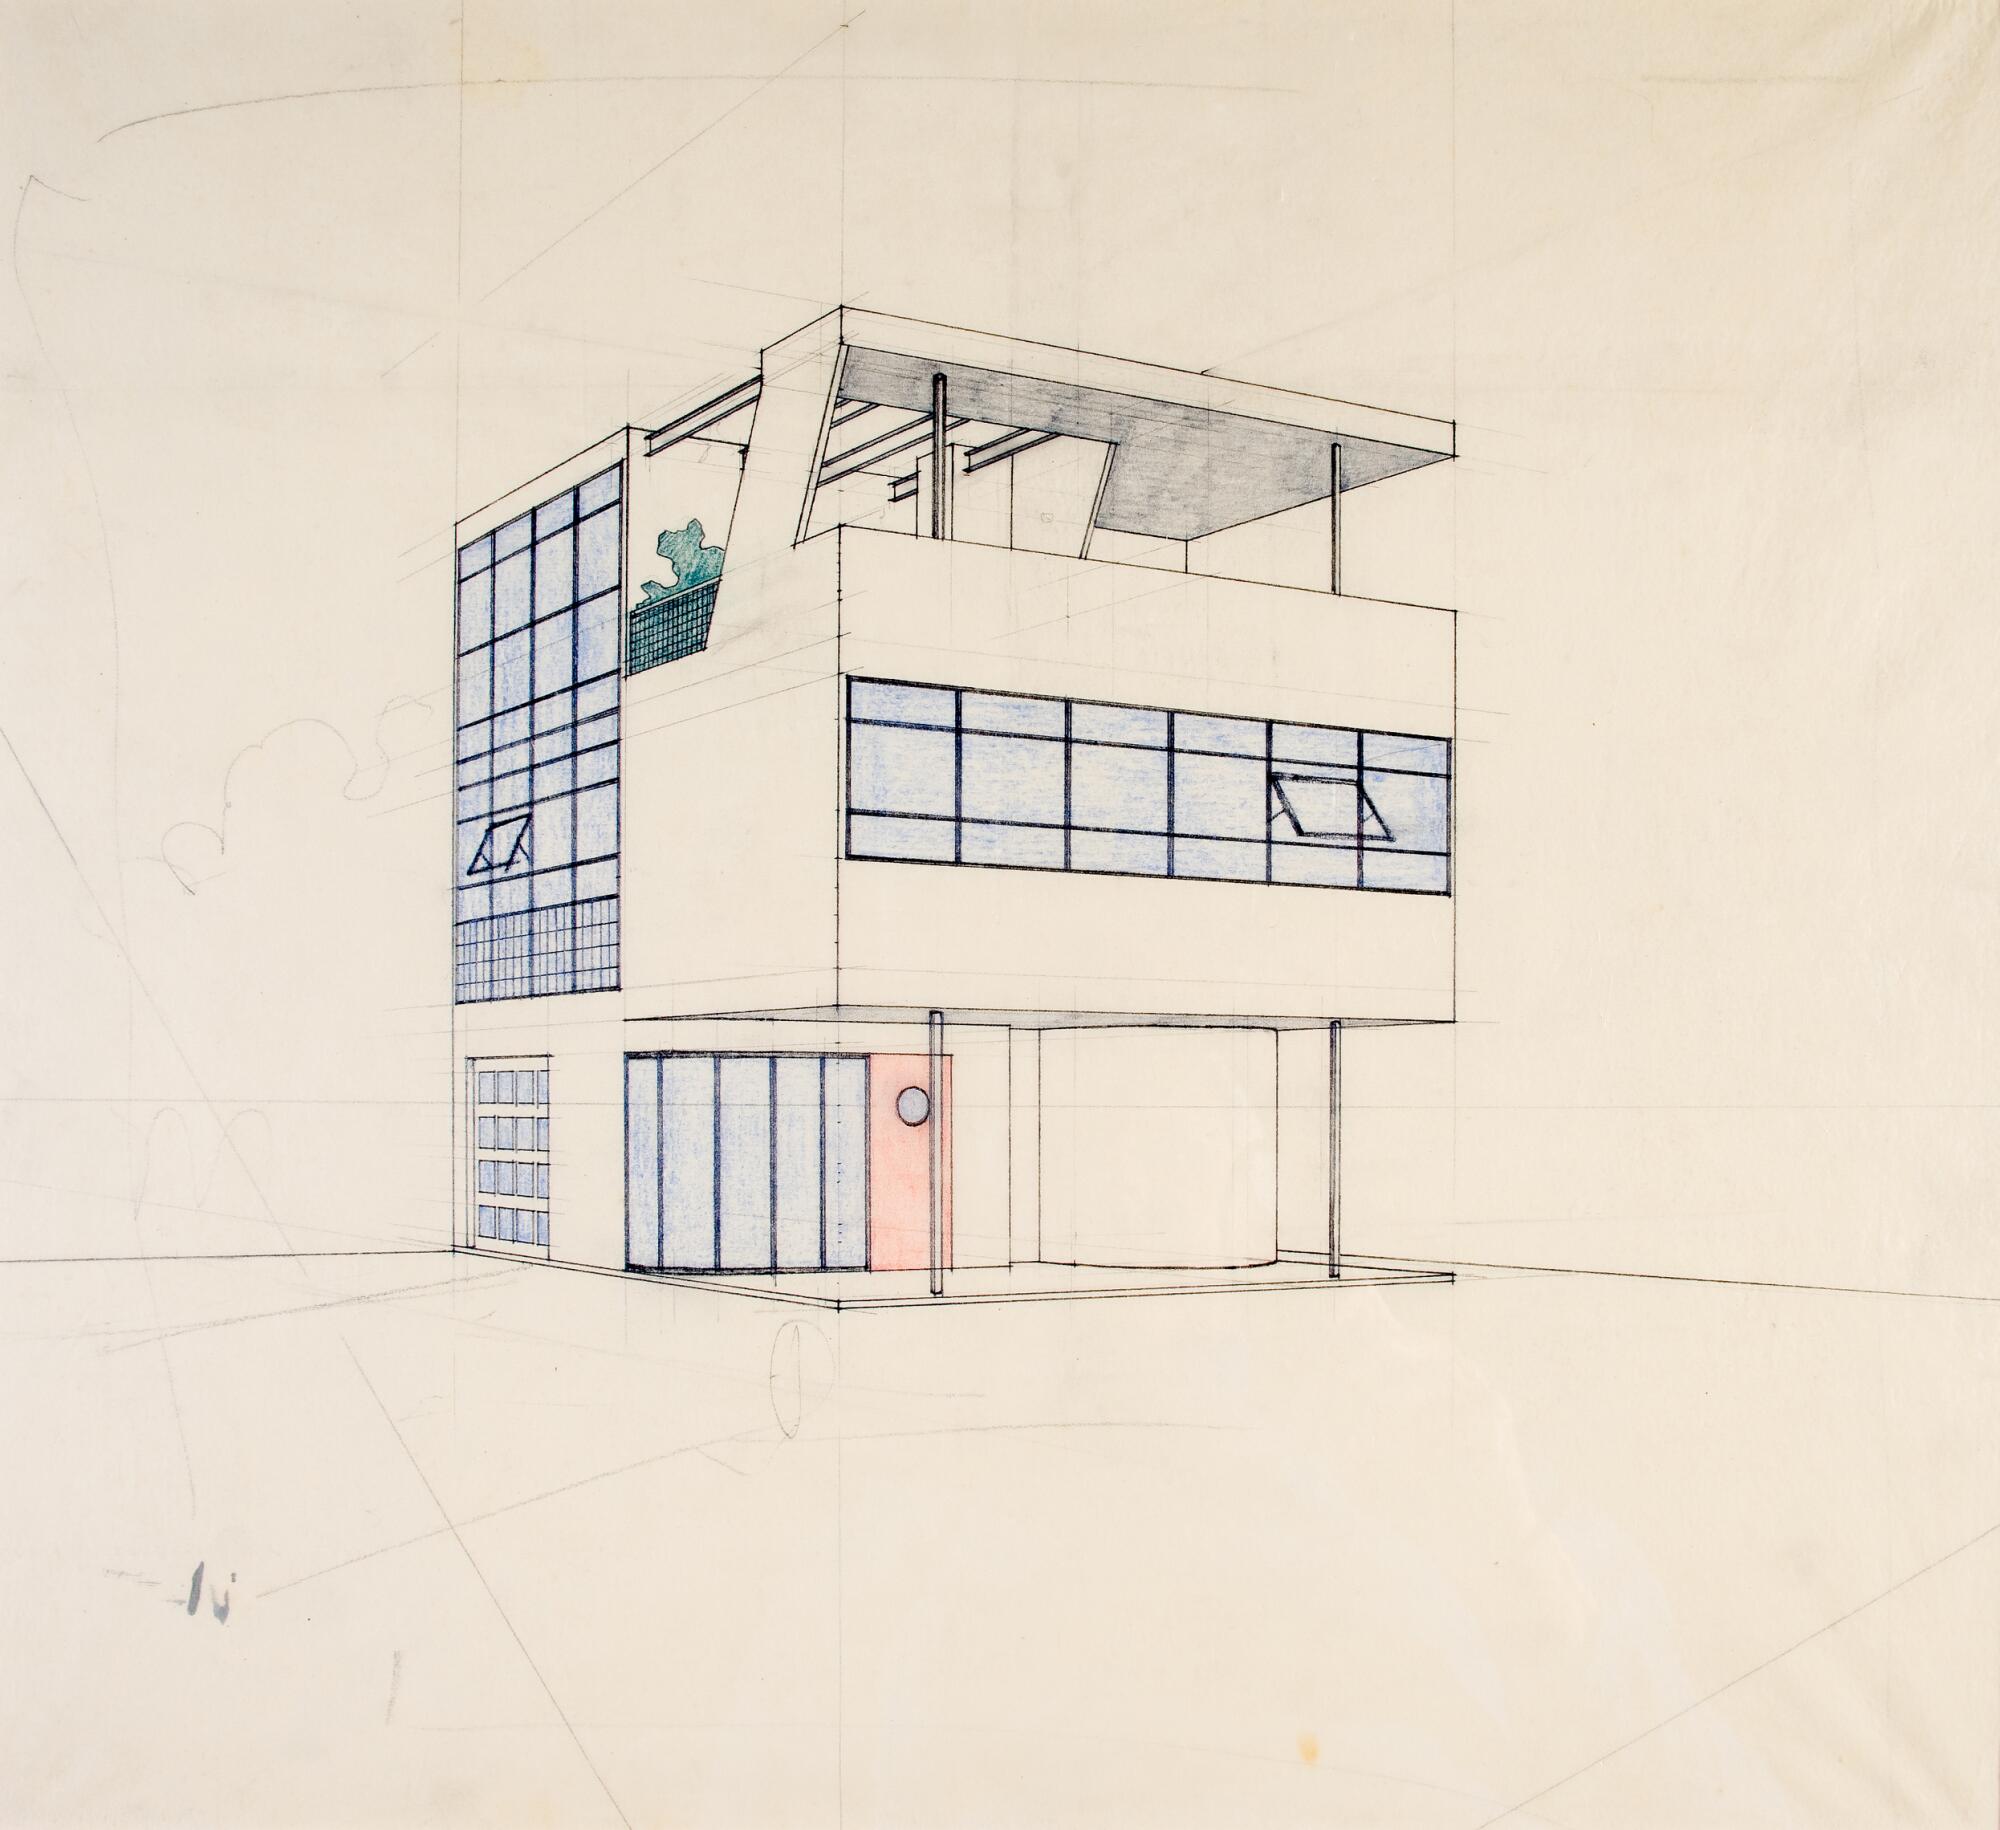 Architects: Kocher & Frey, exterior perspective sketch of the aluminum house.